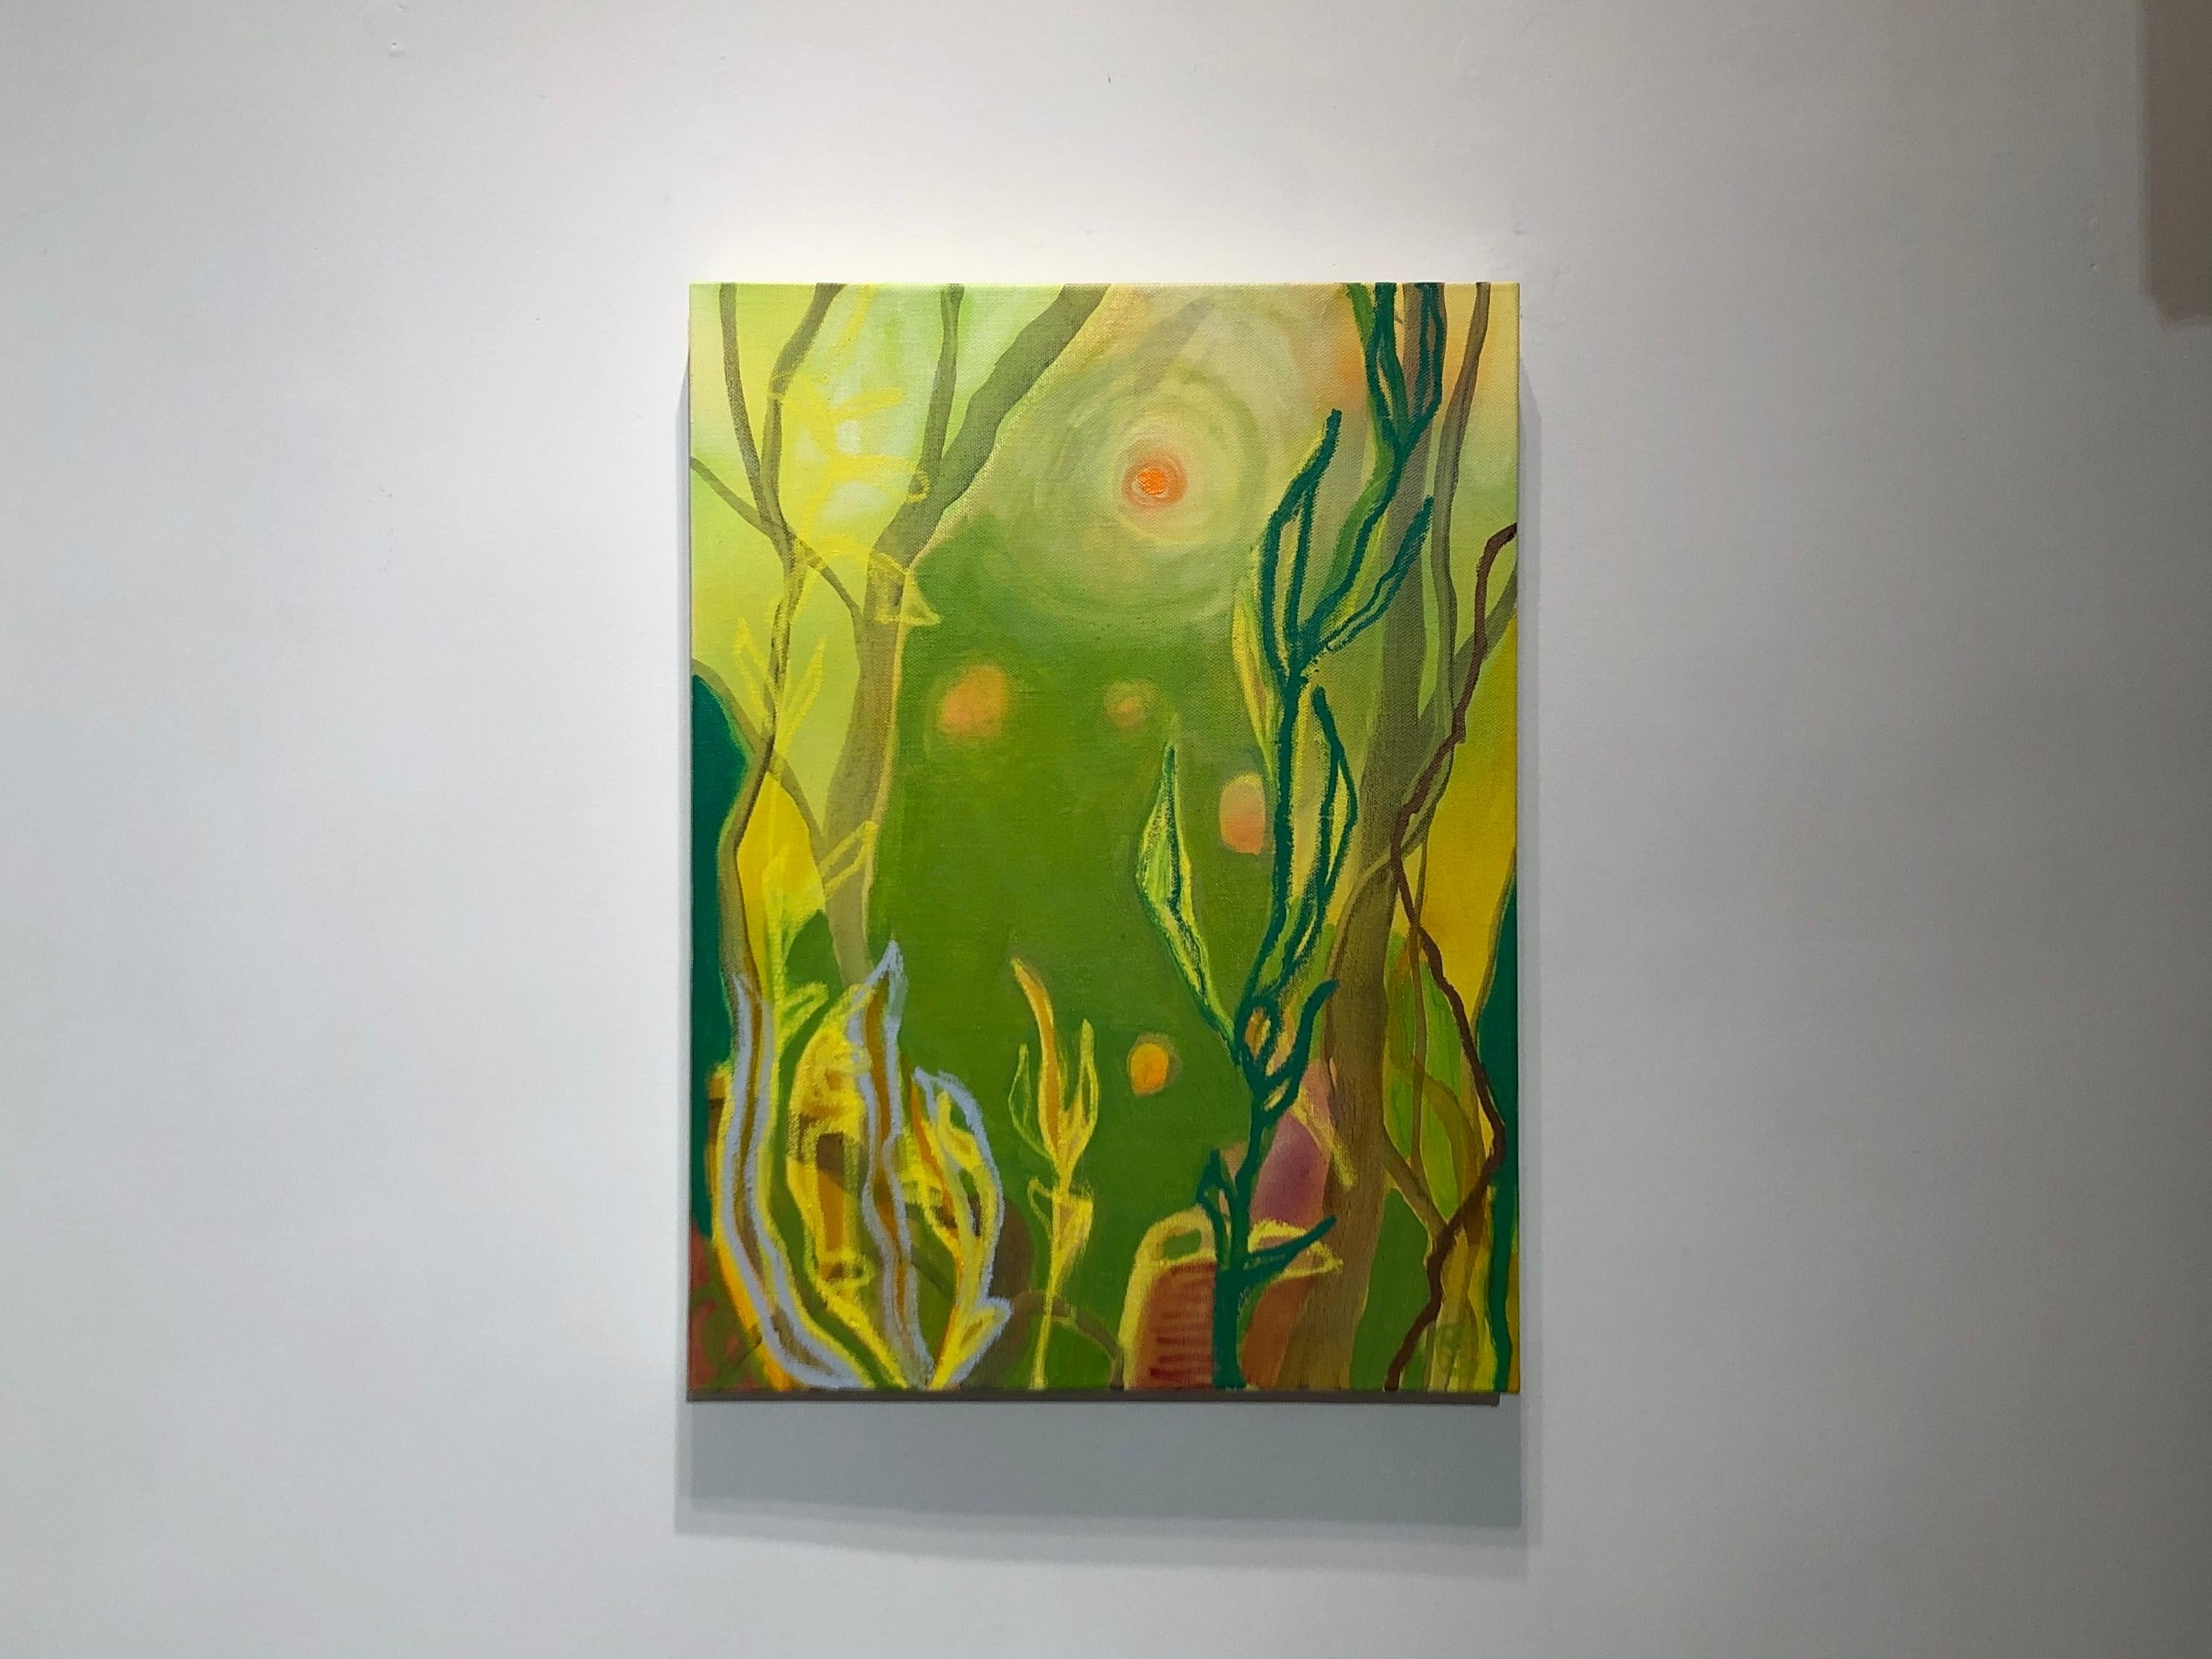 Toxic Swamp and Wildflowers, bright green and yellow abstracted landscape - Painting by Rachelle Krieger